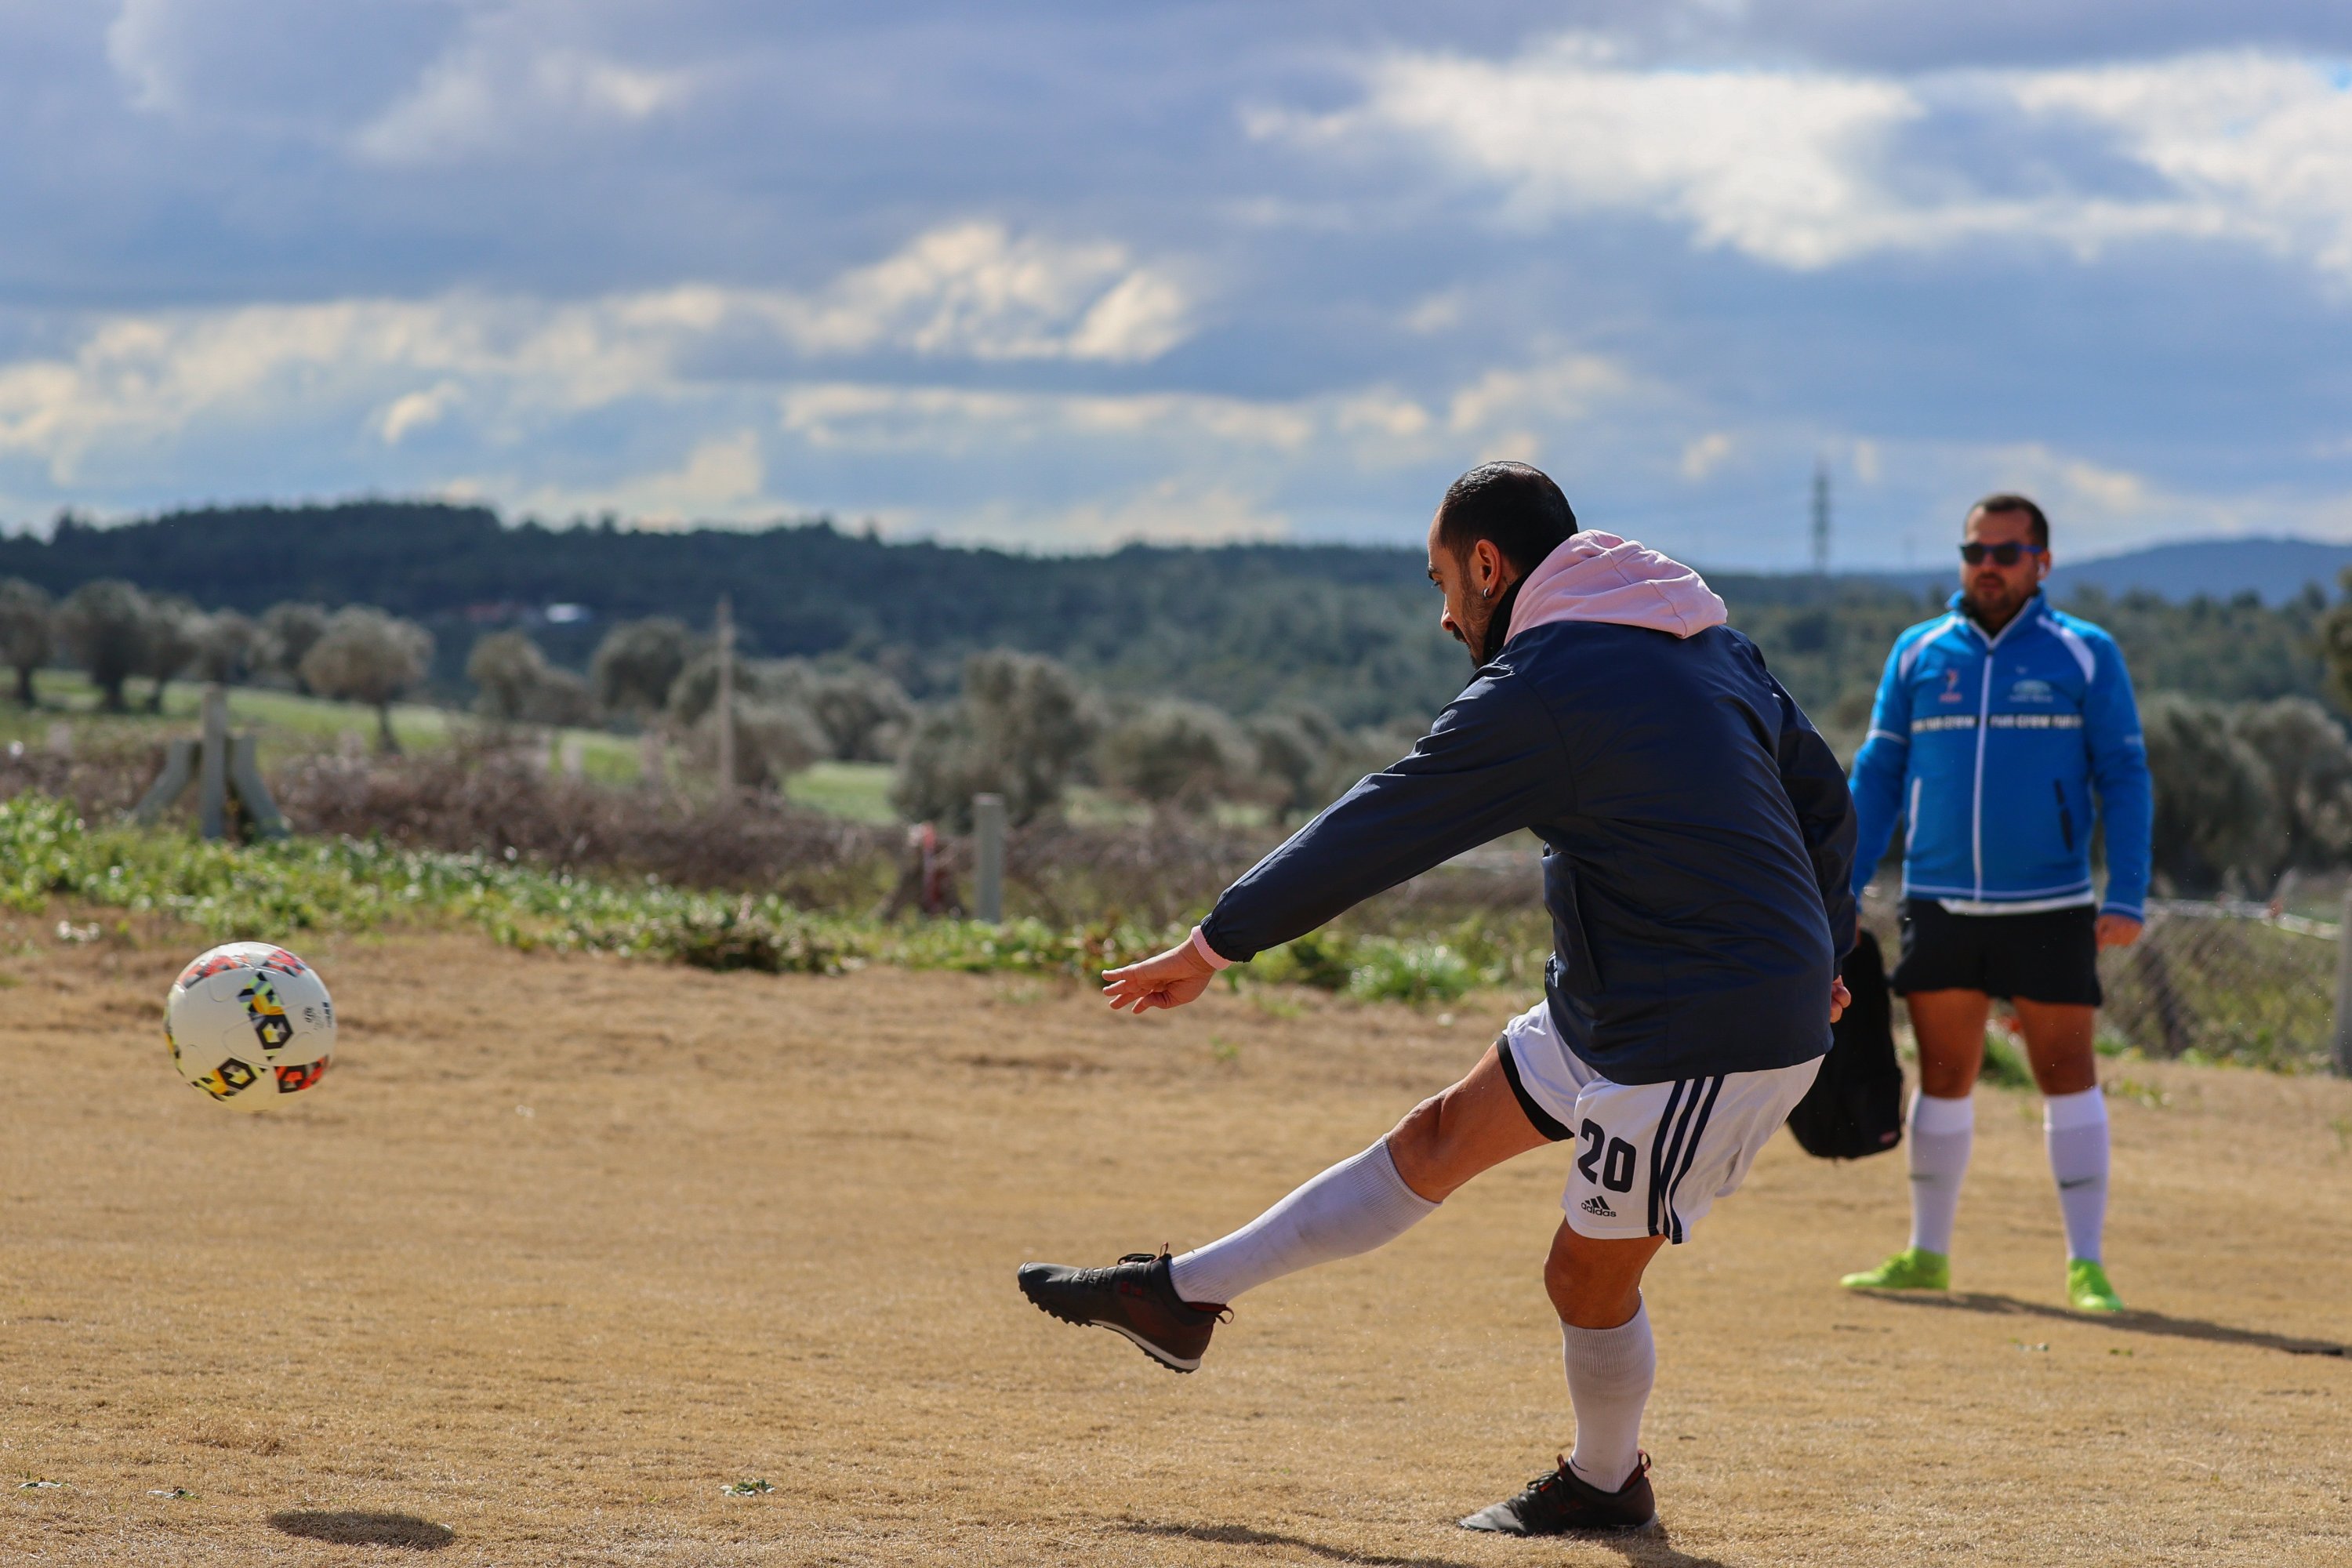 A footgolf player takes a shot during a footgolf game in Urla district, Izmir province, western Turkey, March 10, 2021. (AA Photo)